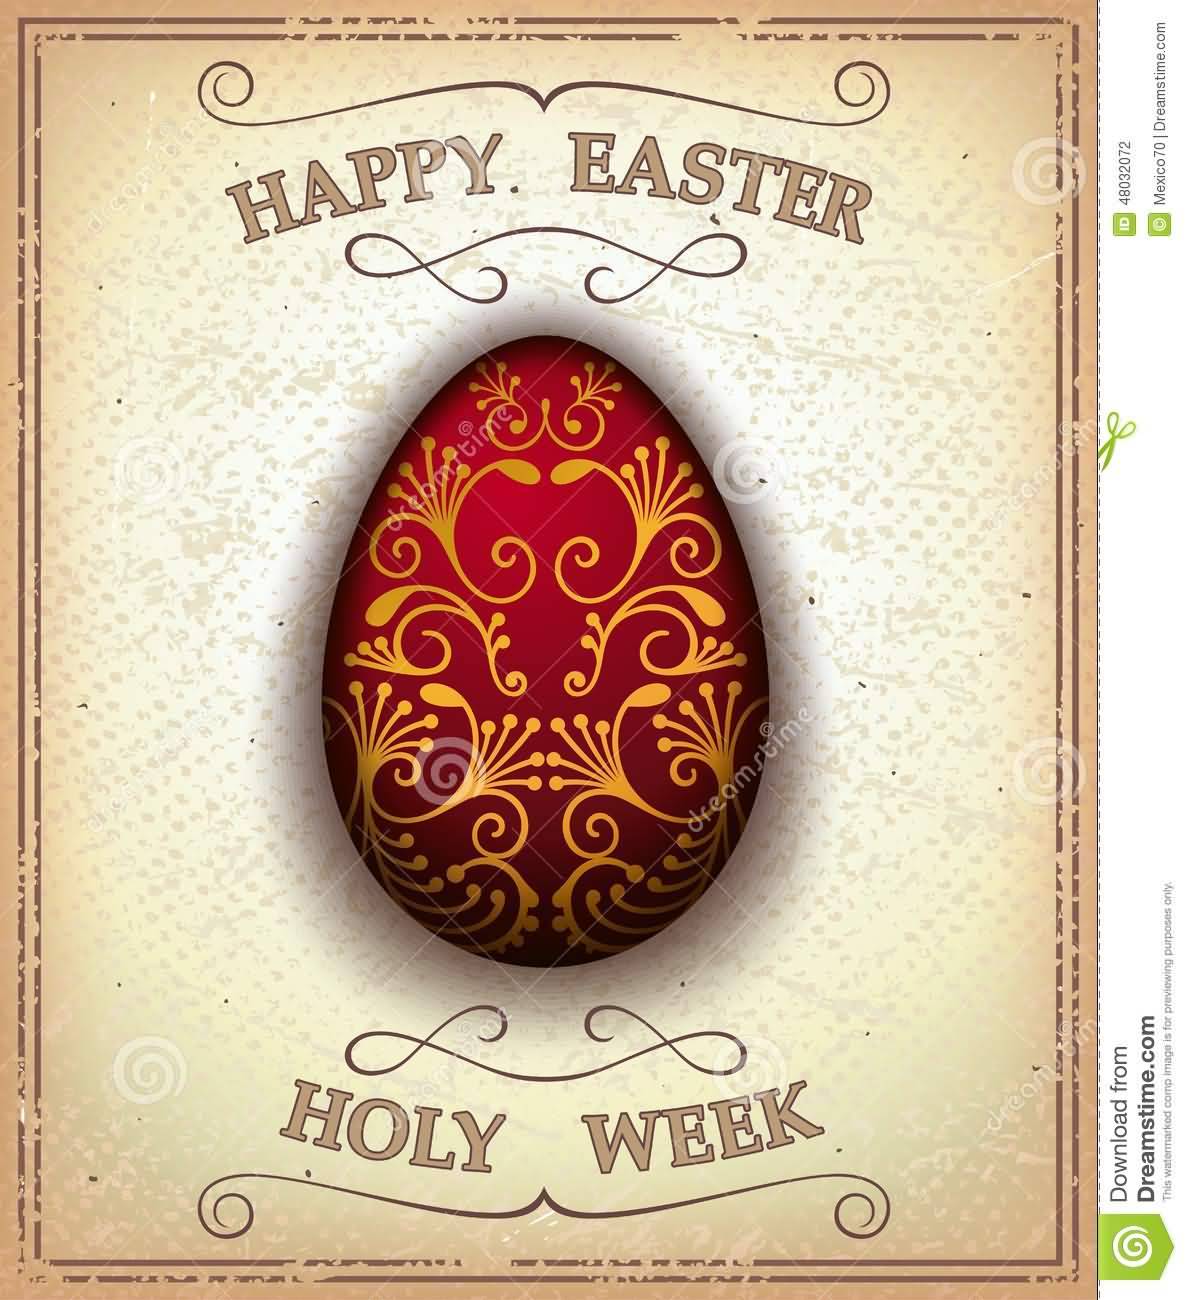 Happy Easter And Holy Week Beautiful Easter Egg Card